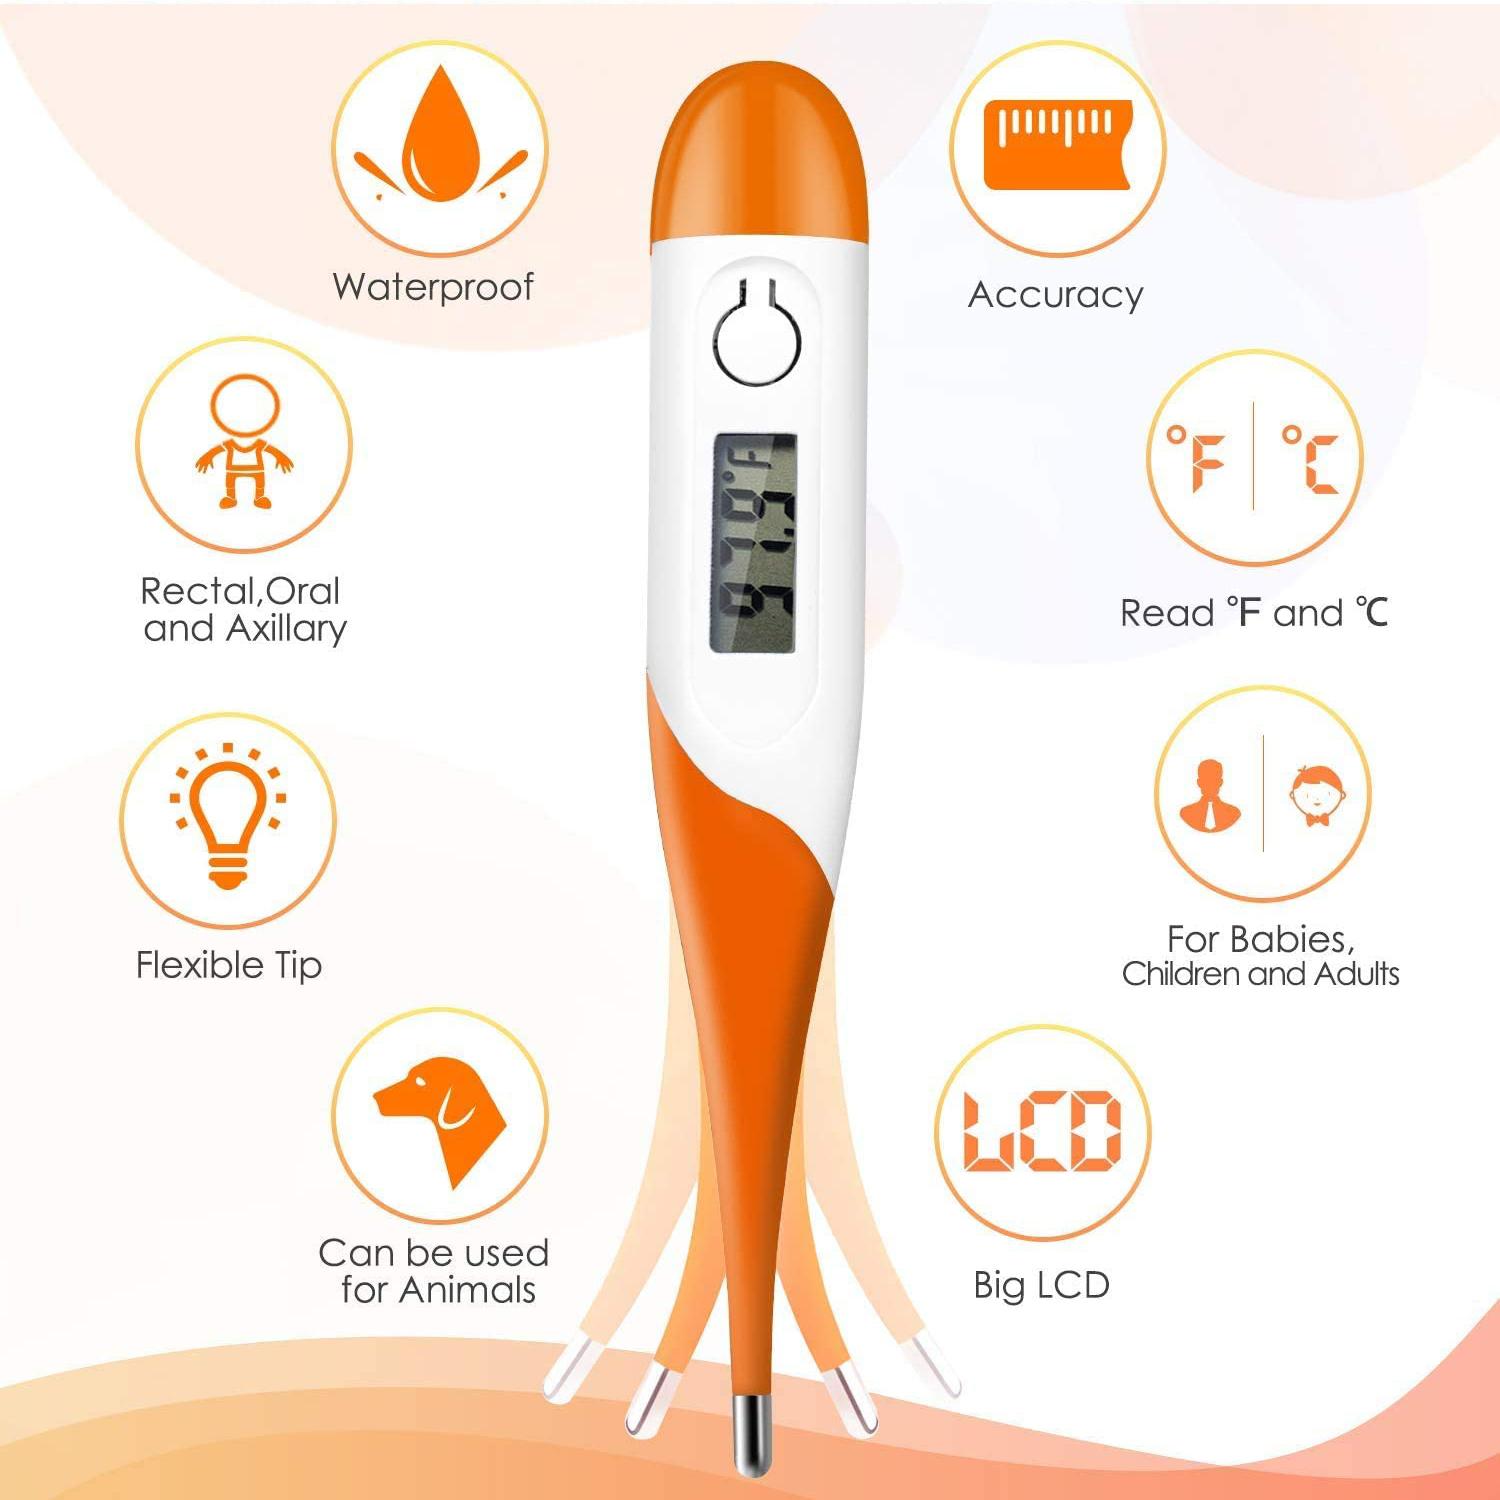 Adult Pediatric Baby Clinical Digital LCD Thermometer New